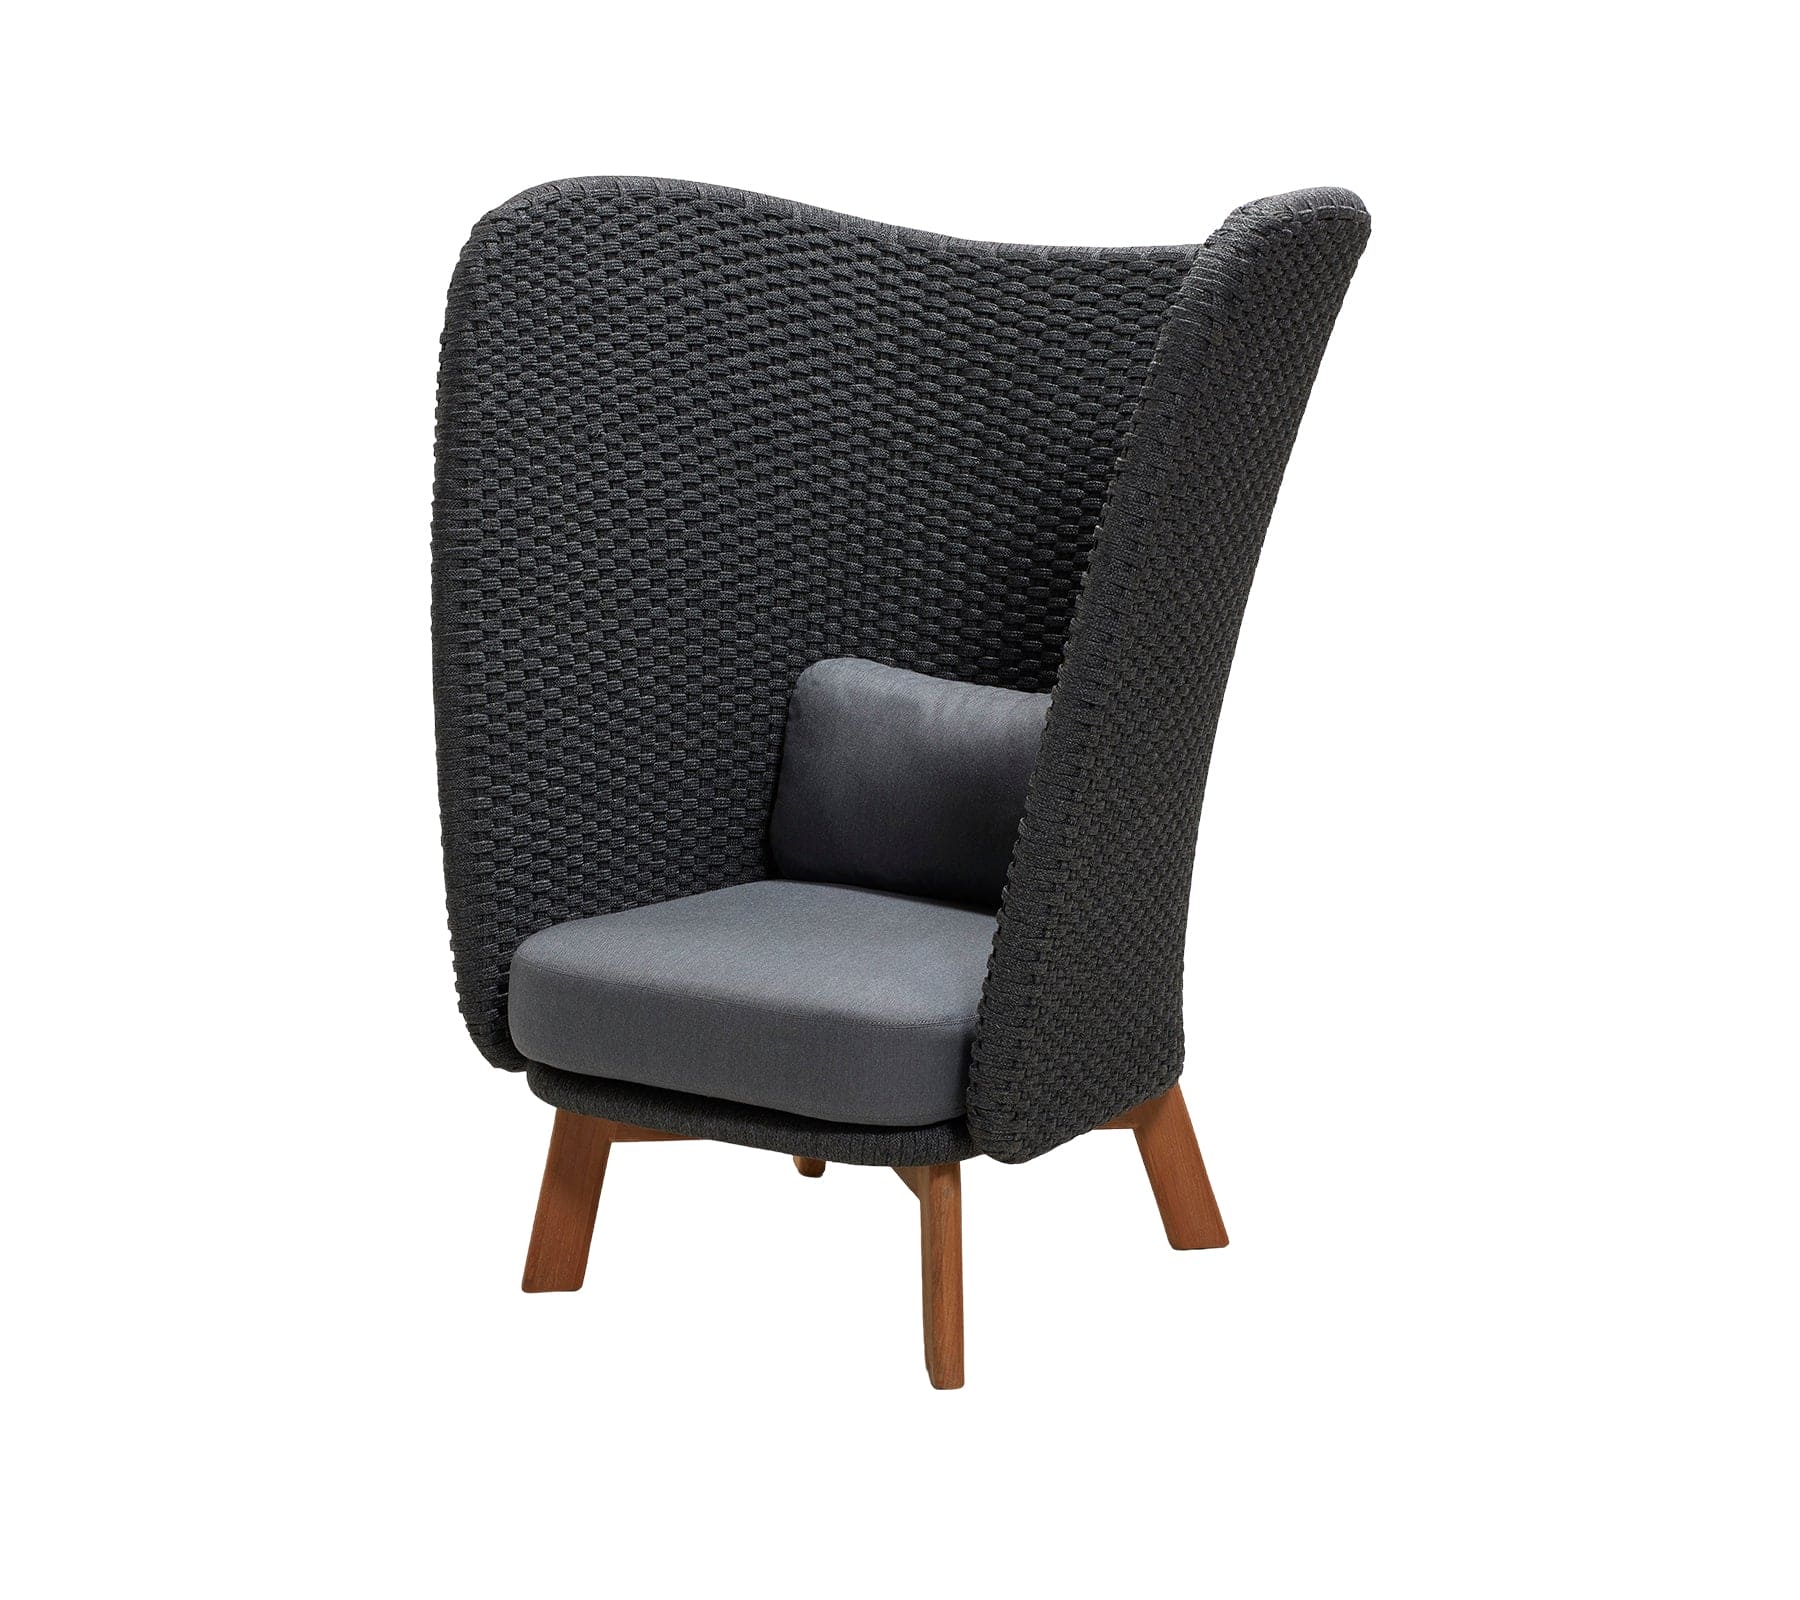 Boxhill's Peacock dark grey outdoor wing highback chair with grey cushion front side view on white background